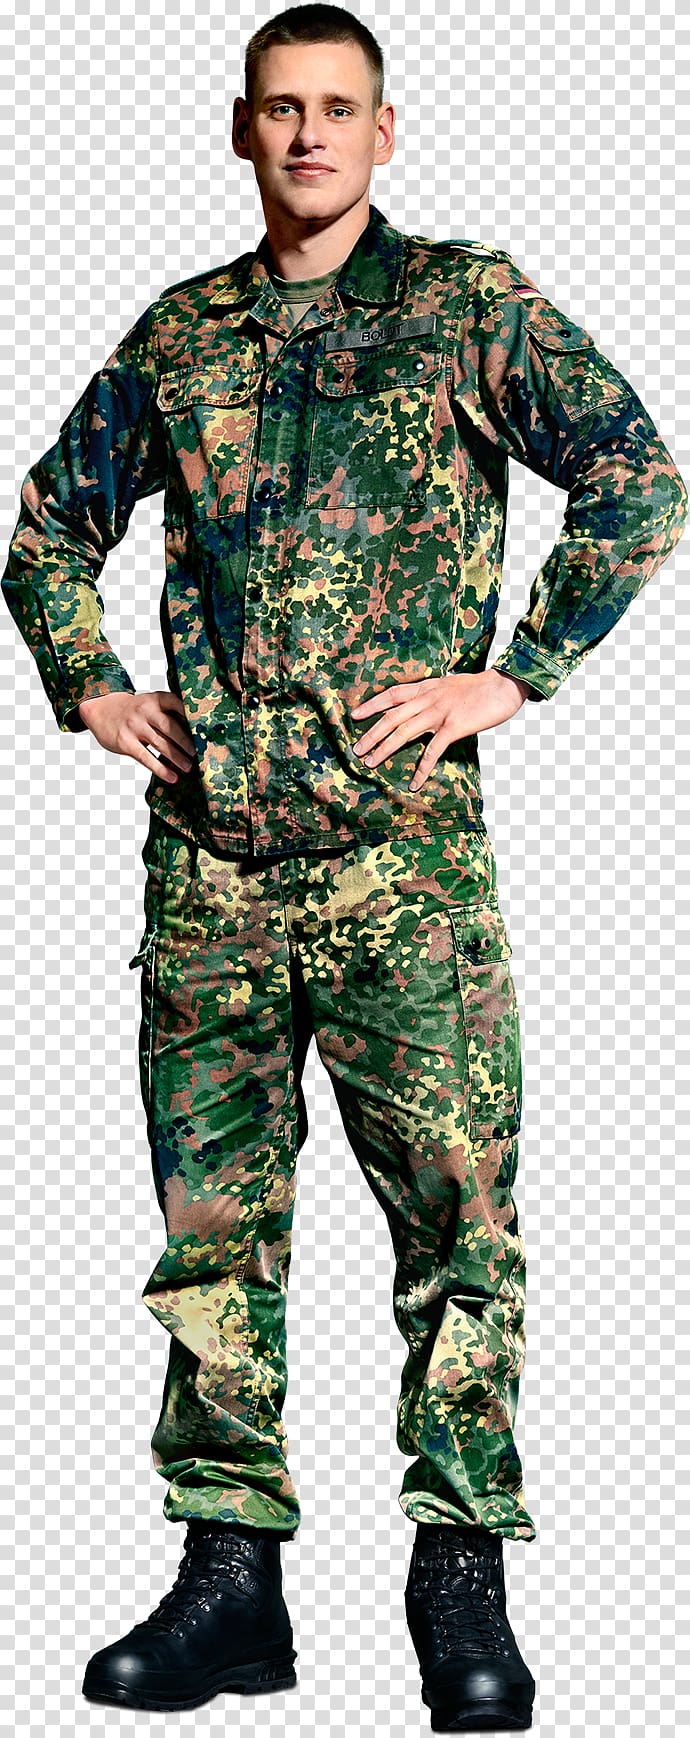 Military camouflage Soldier Die Rekruten Army, Soldier transparent background PNG clipart